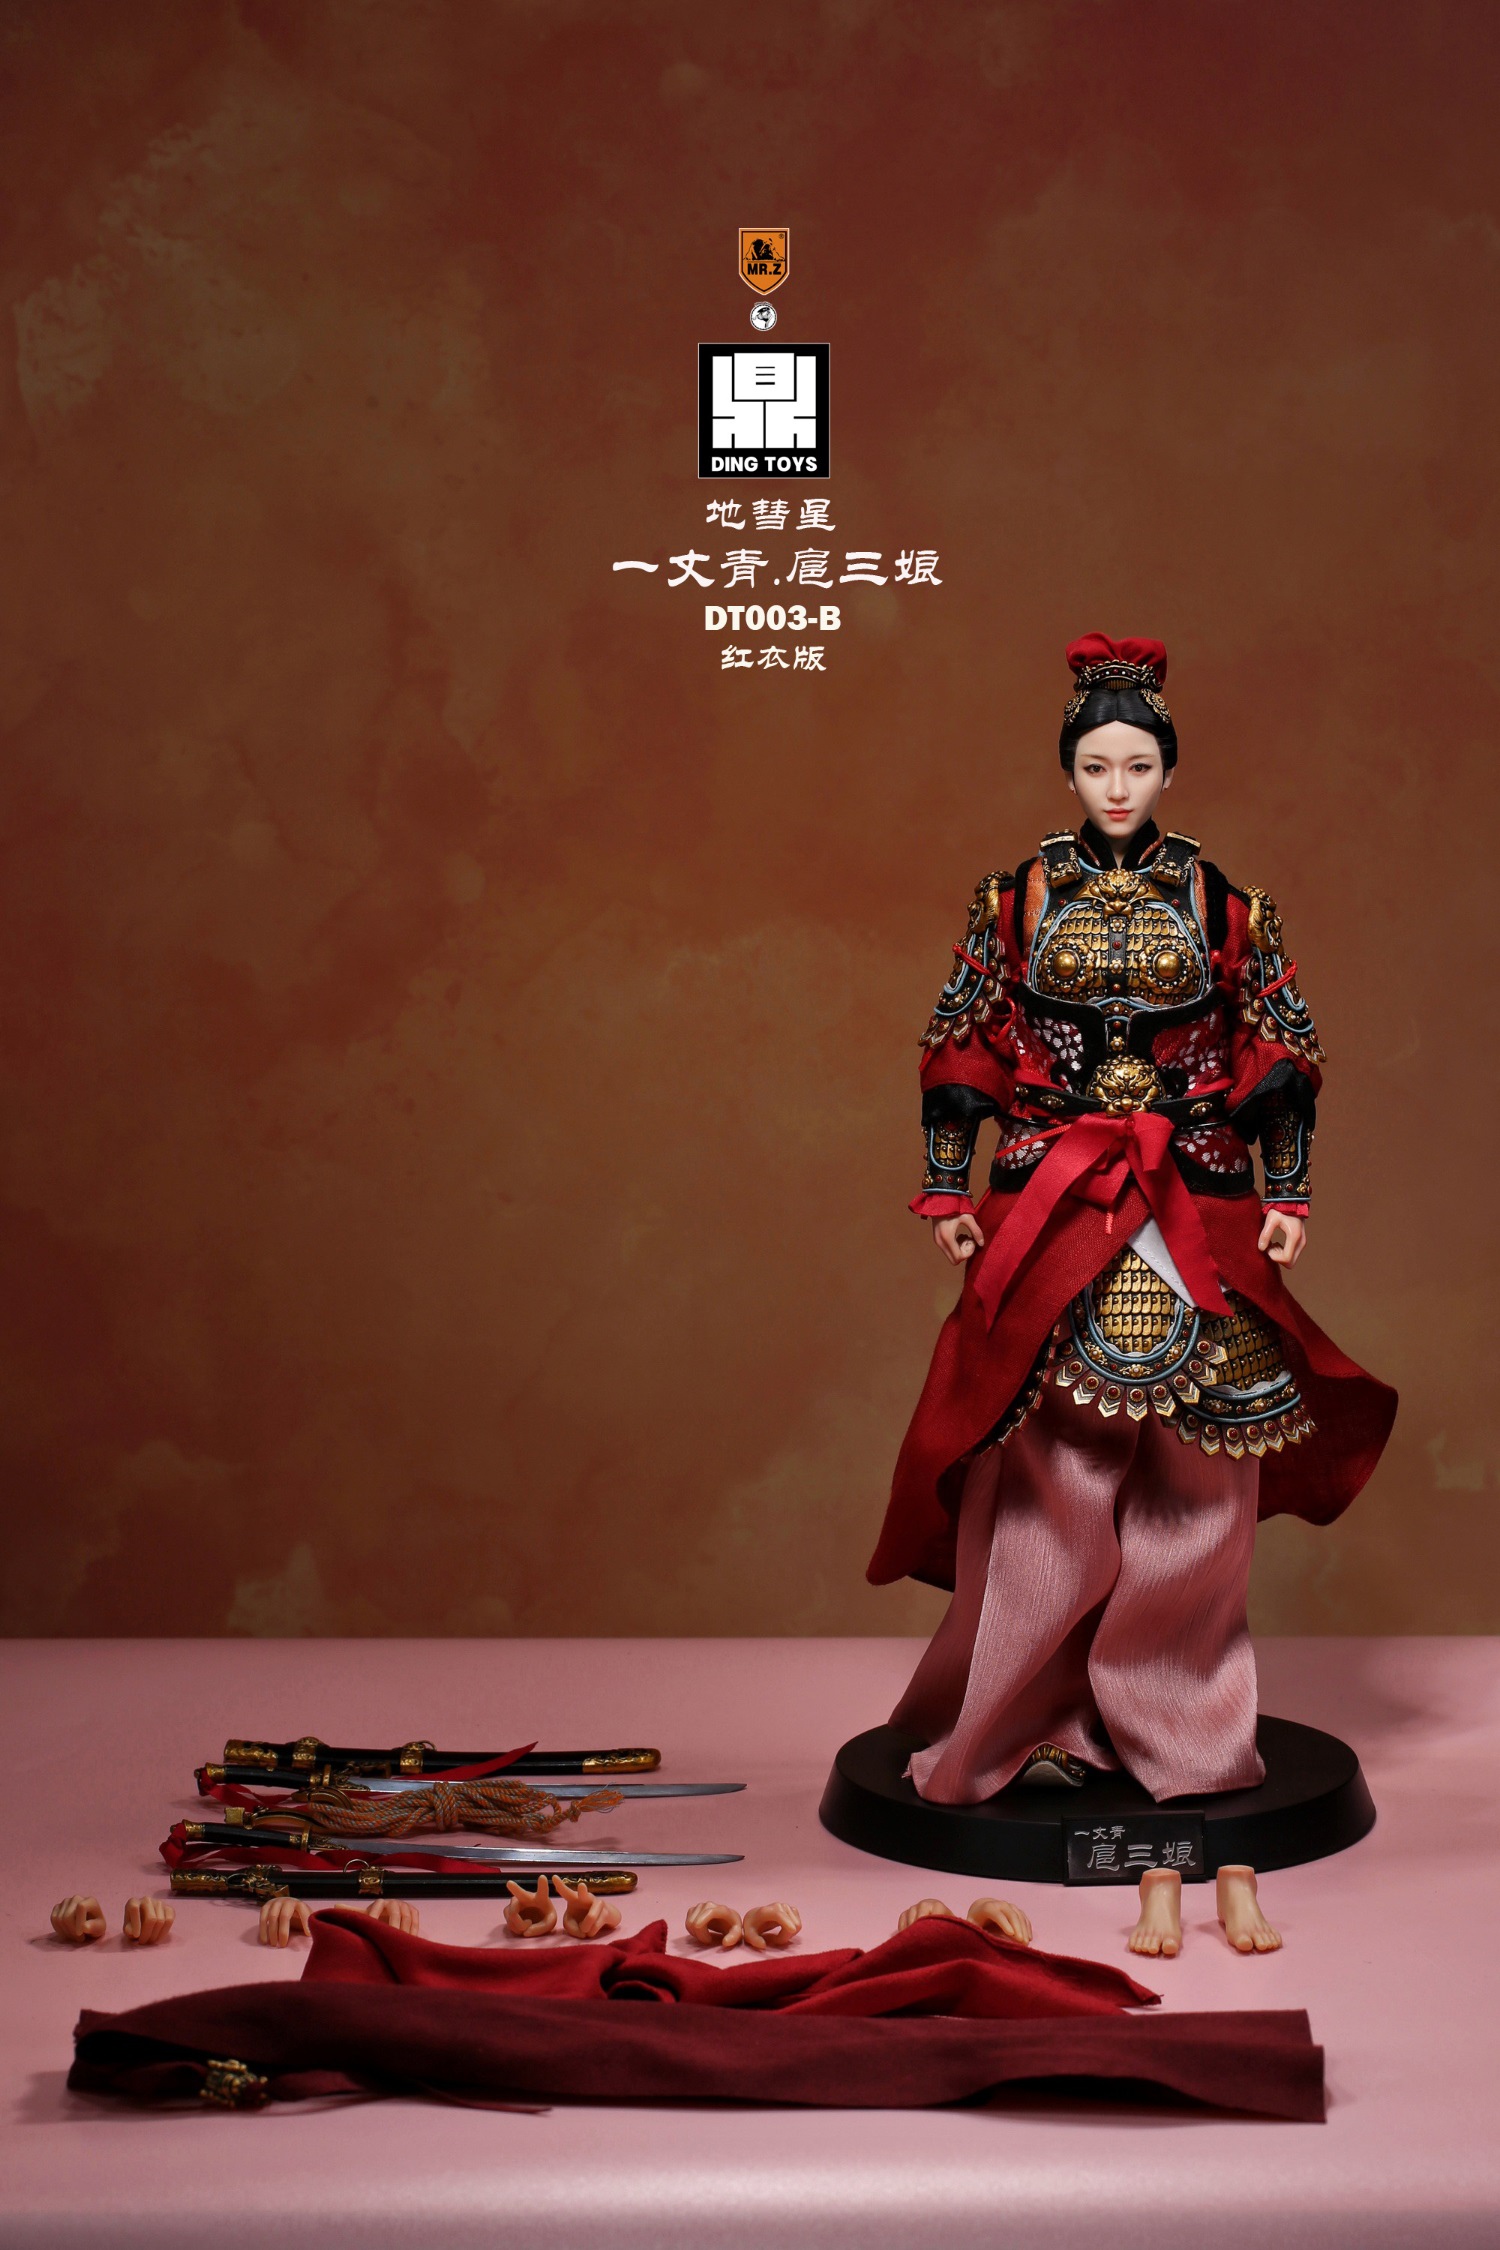 MrZ - NEW PRODUCT: Mr.Z x Ding Toys DT003 1/6 Scale 《Water Margin》Shiying Zhang (Green and Red versions), Horse (White) 4718